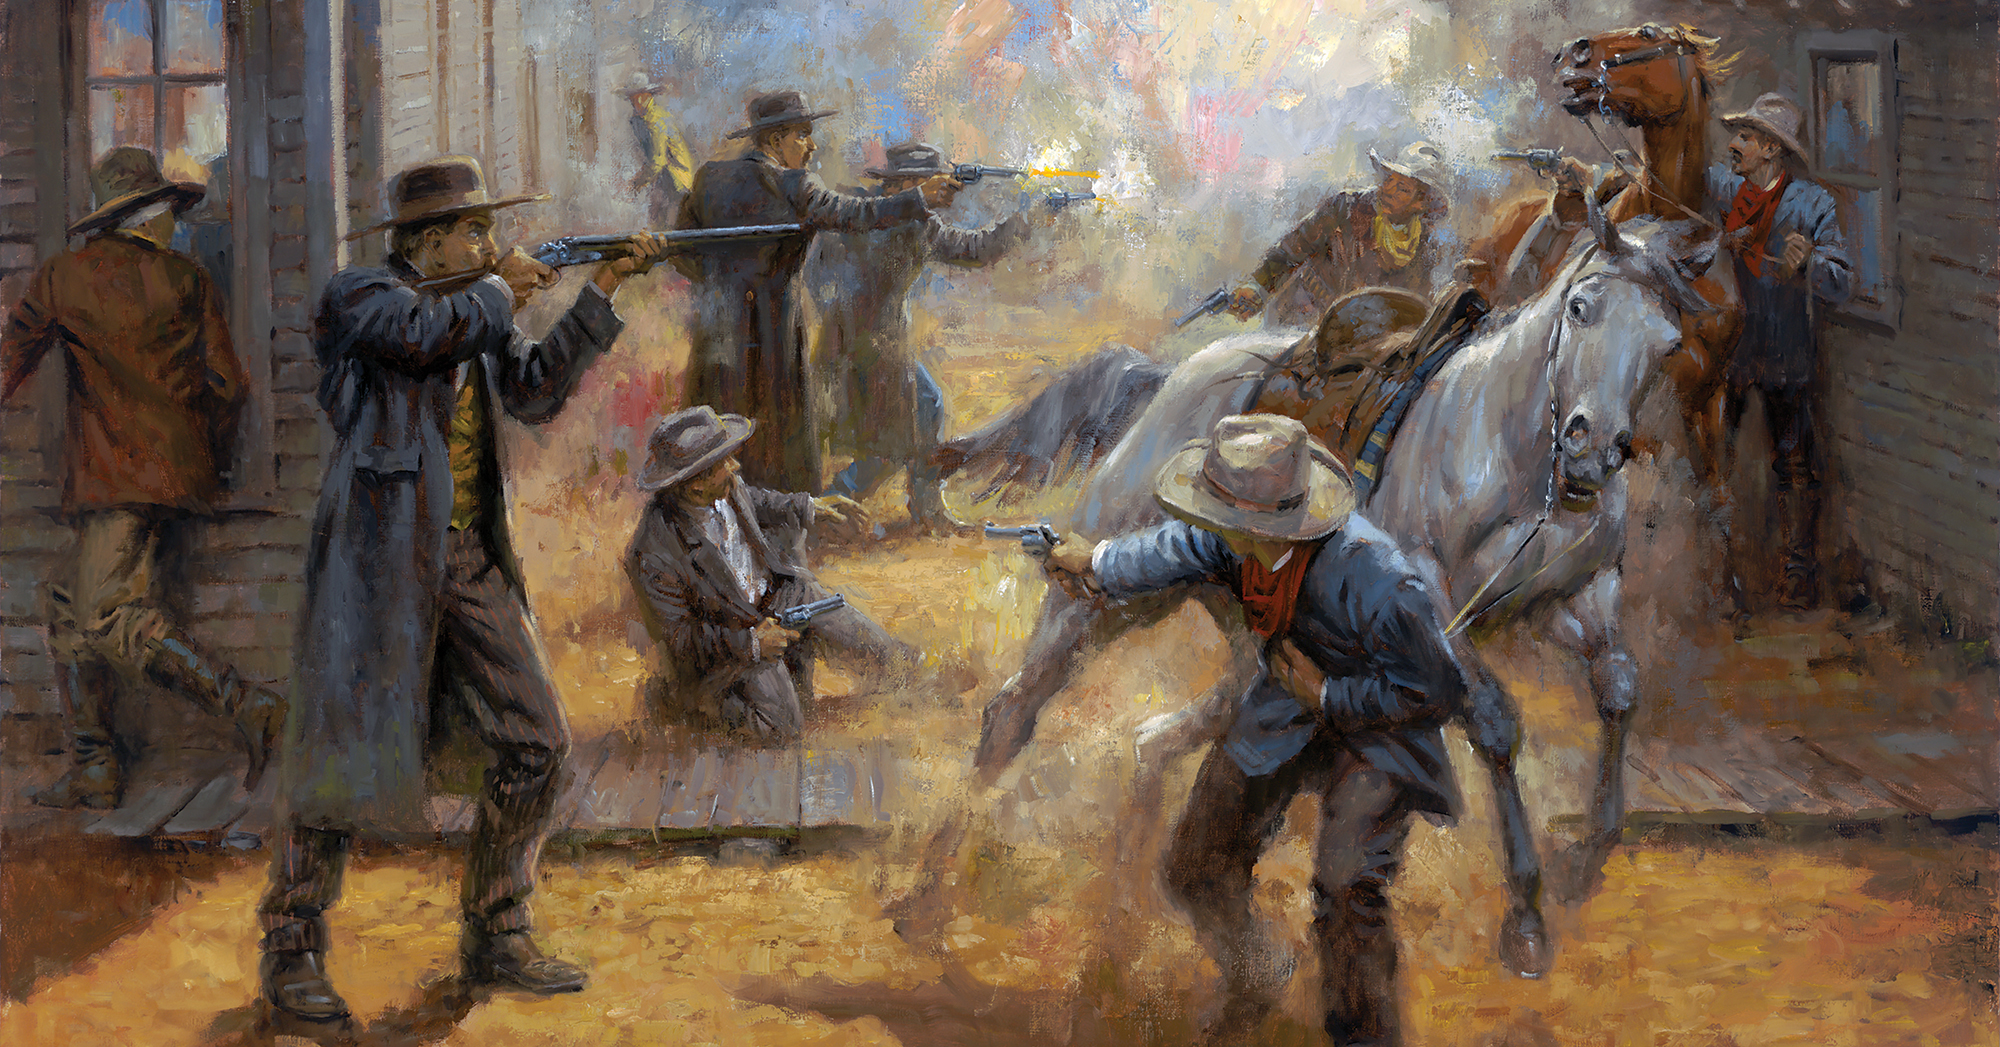 Tombstone Turmoil painting by Andy Thomas